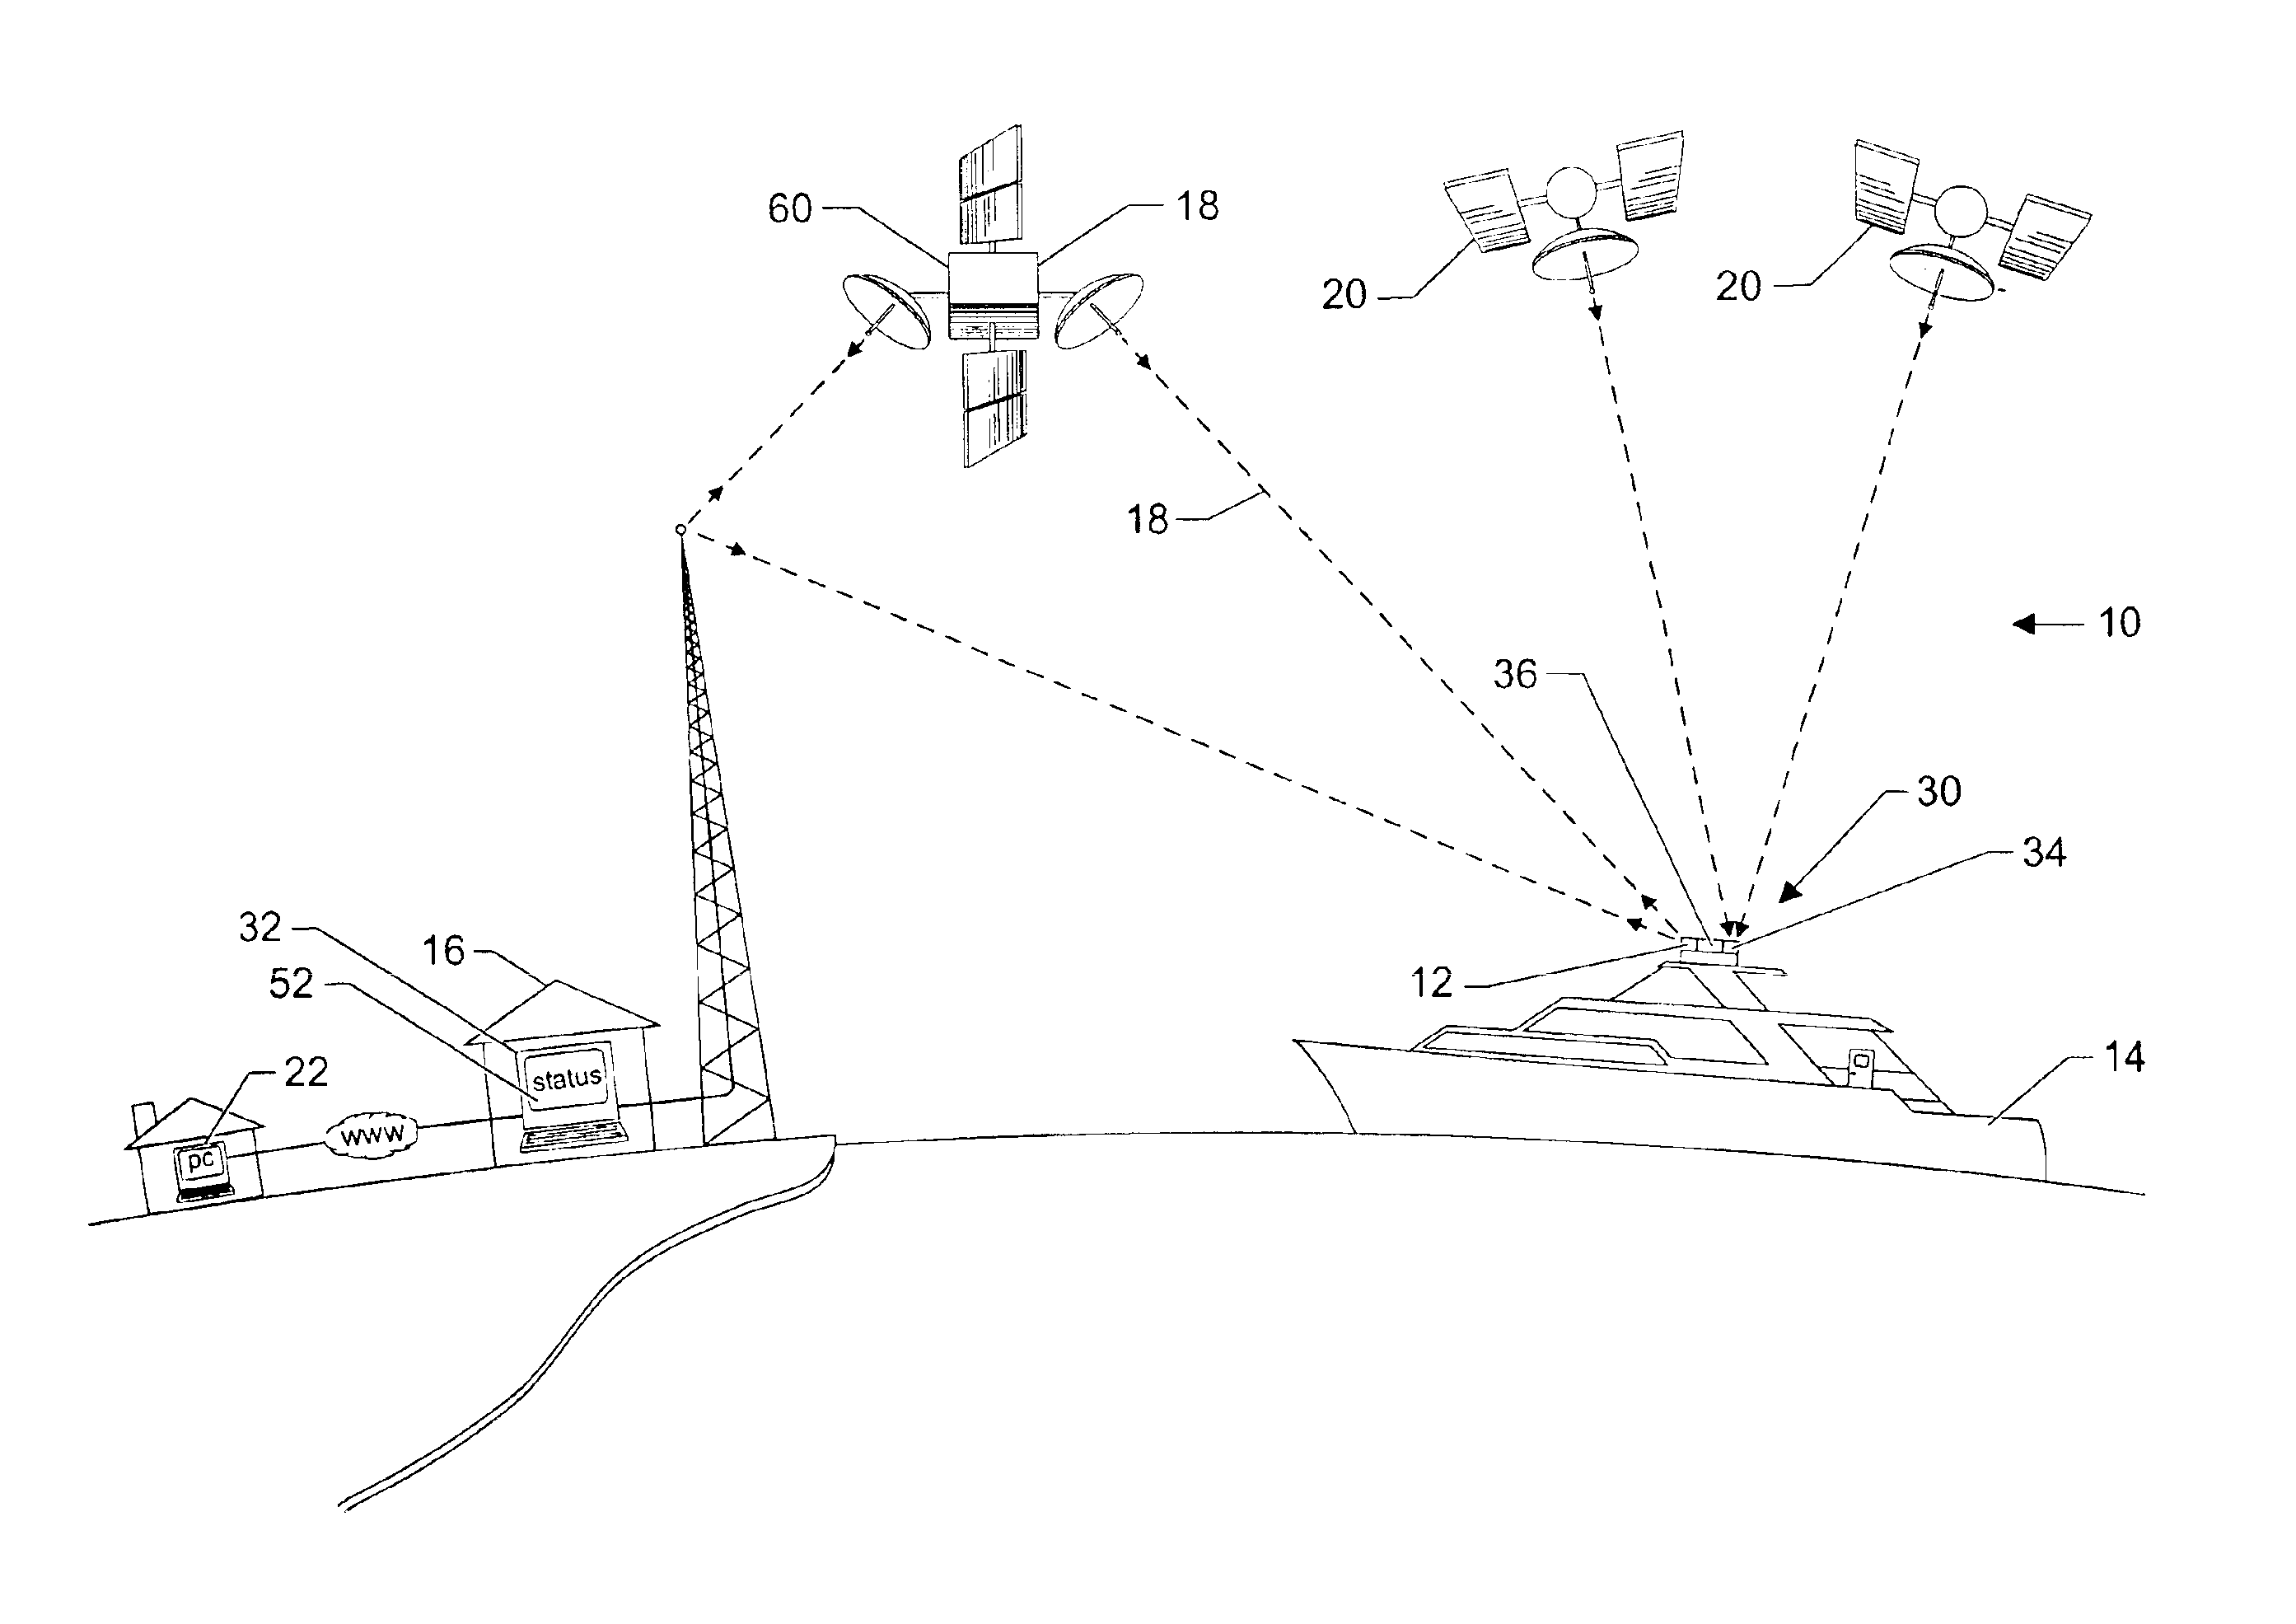 System for tracking and monitoring vessels